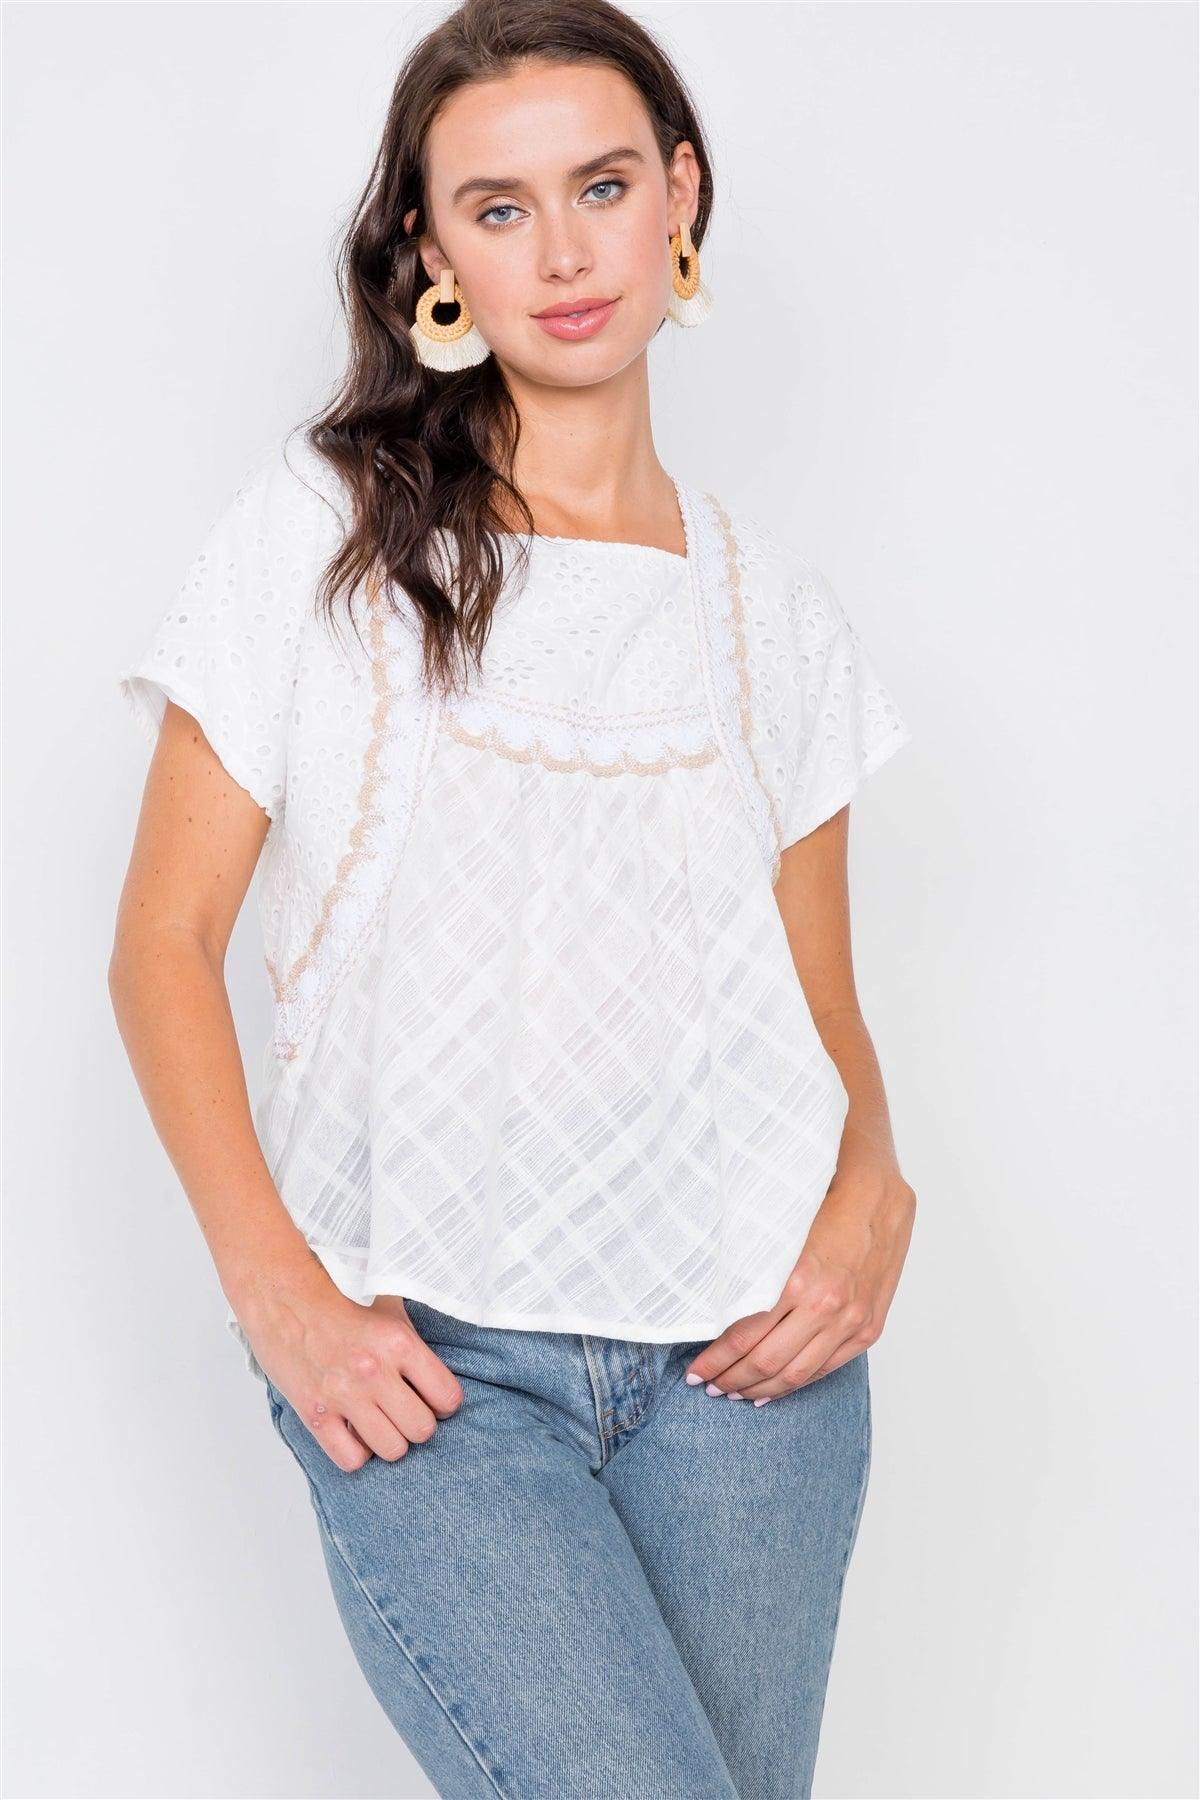 Ivory Floral Eyelet Square Neck High-Low Top /2-2-2